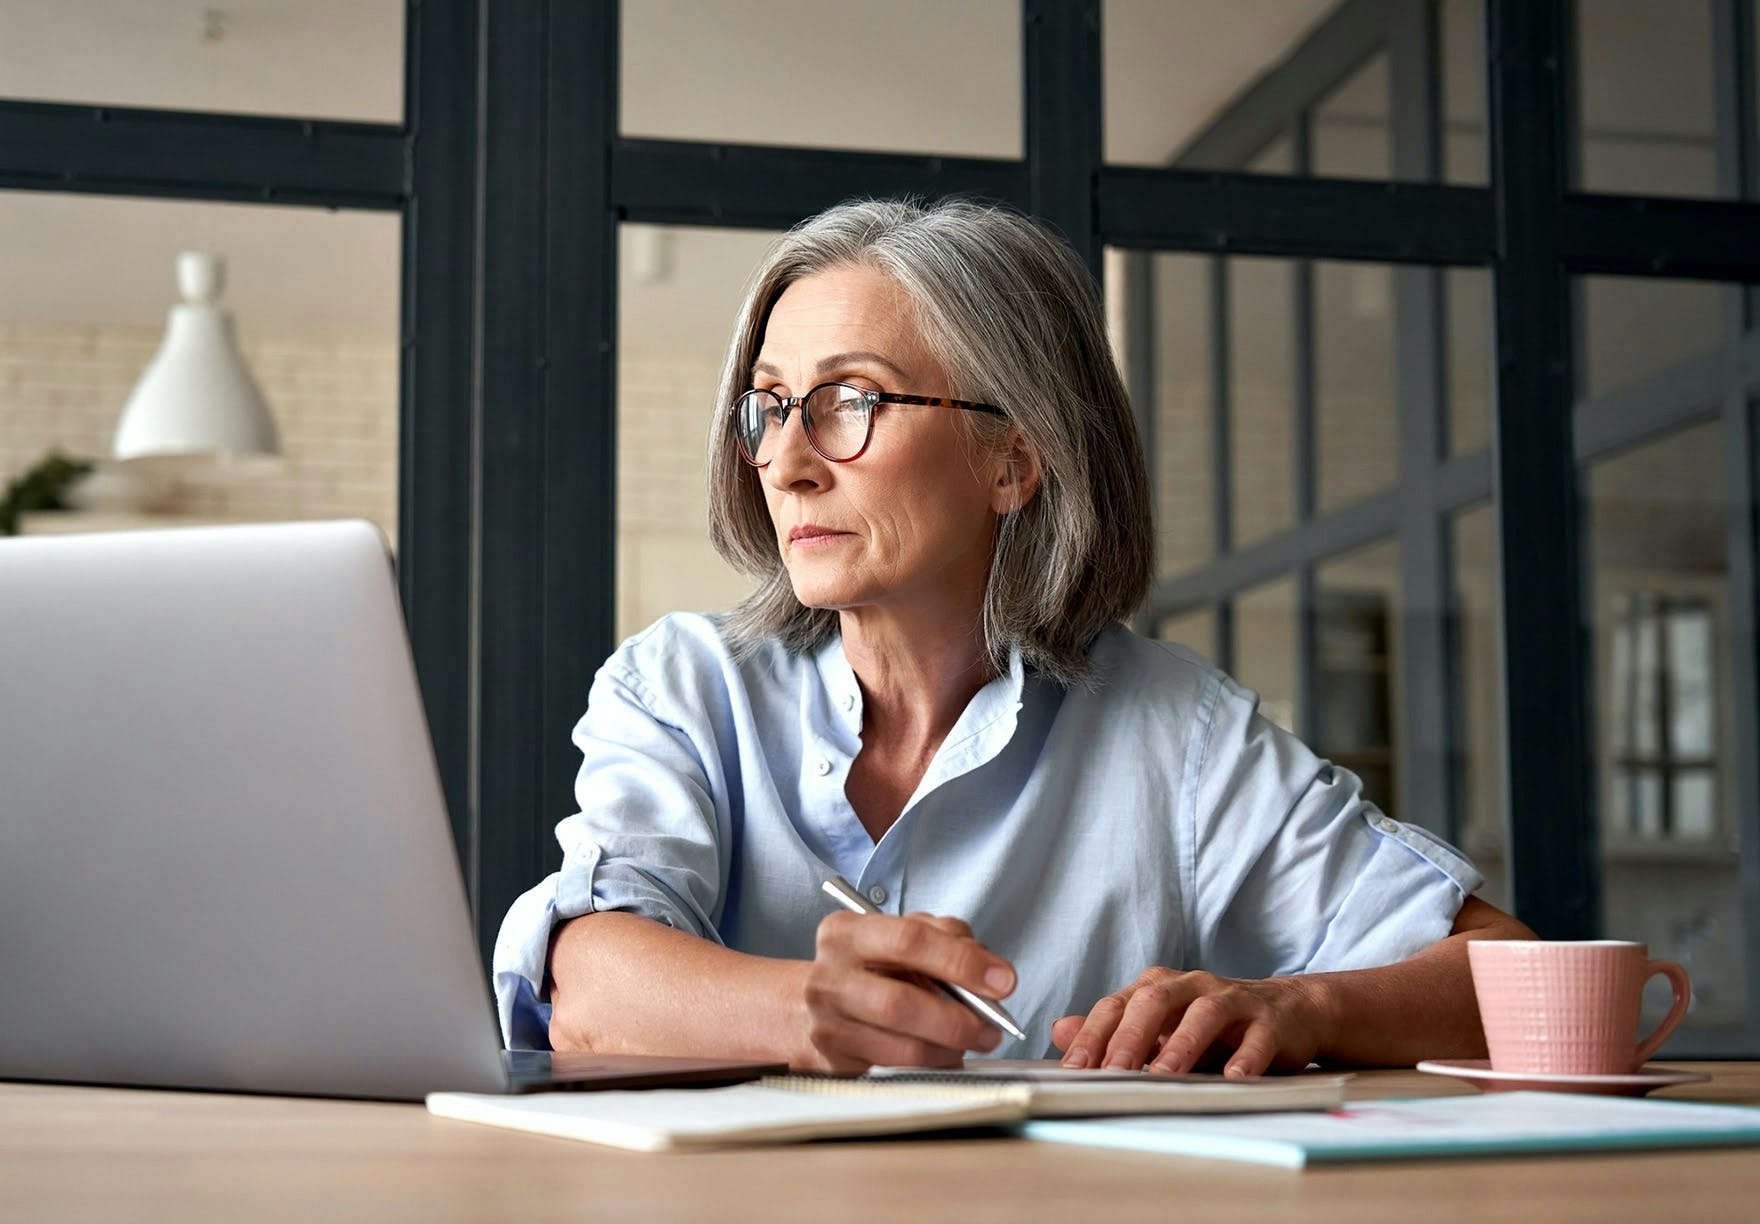 An older woman pensively fills out a form